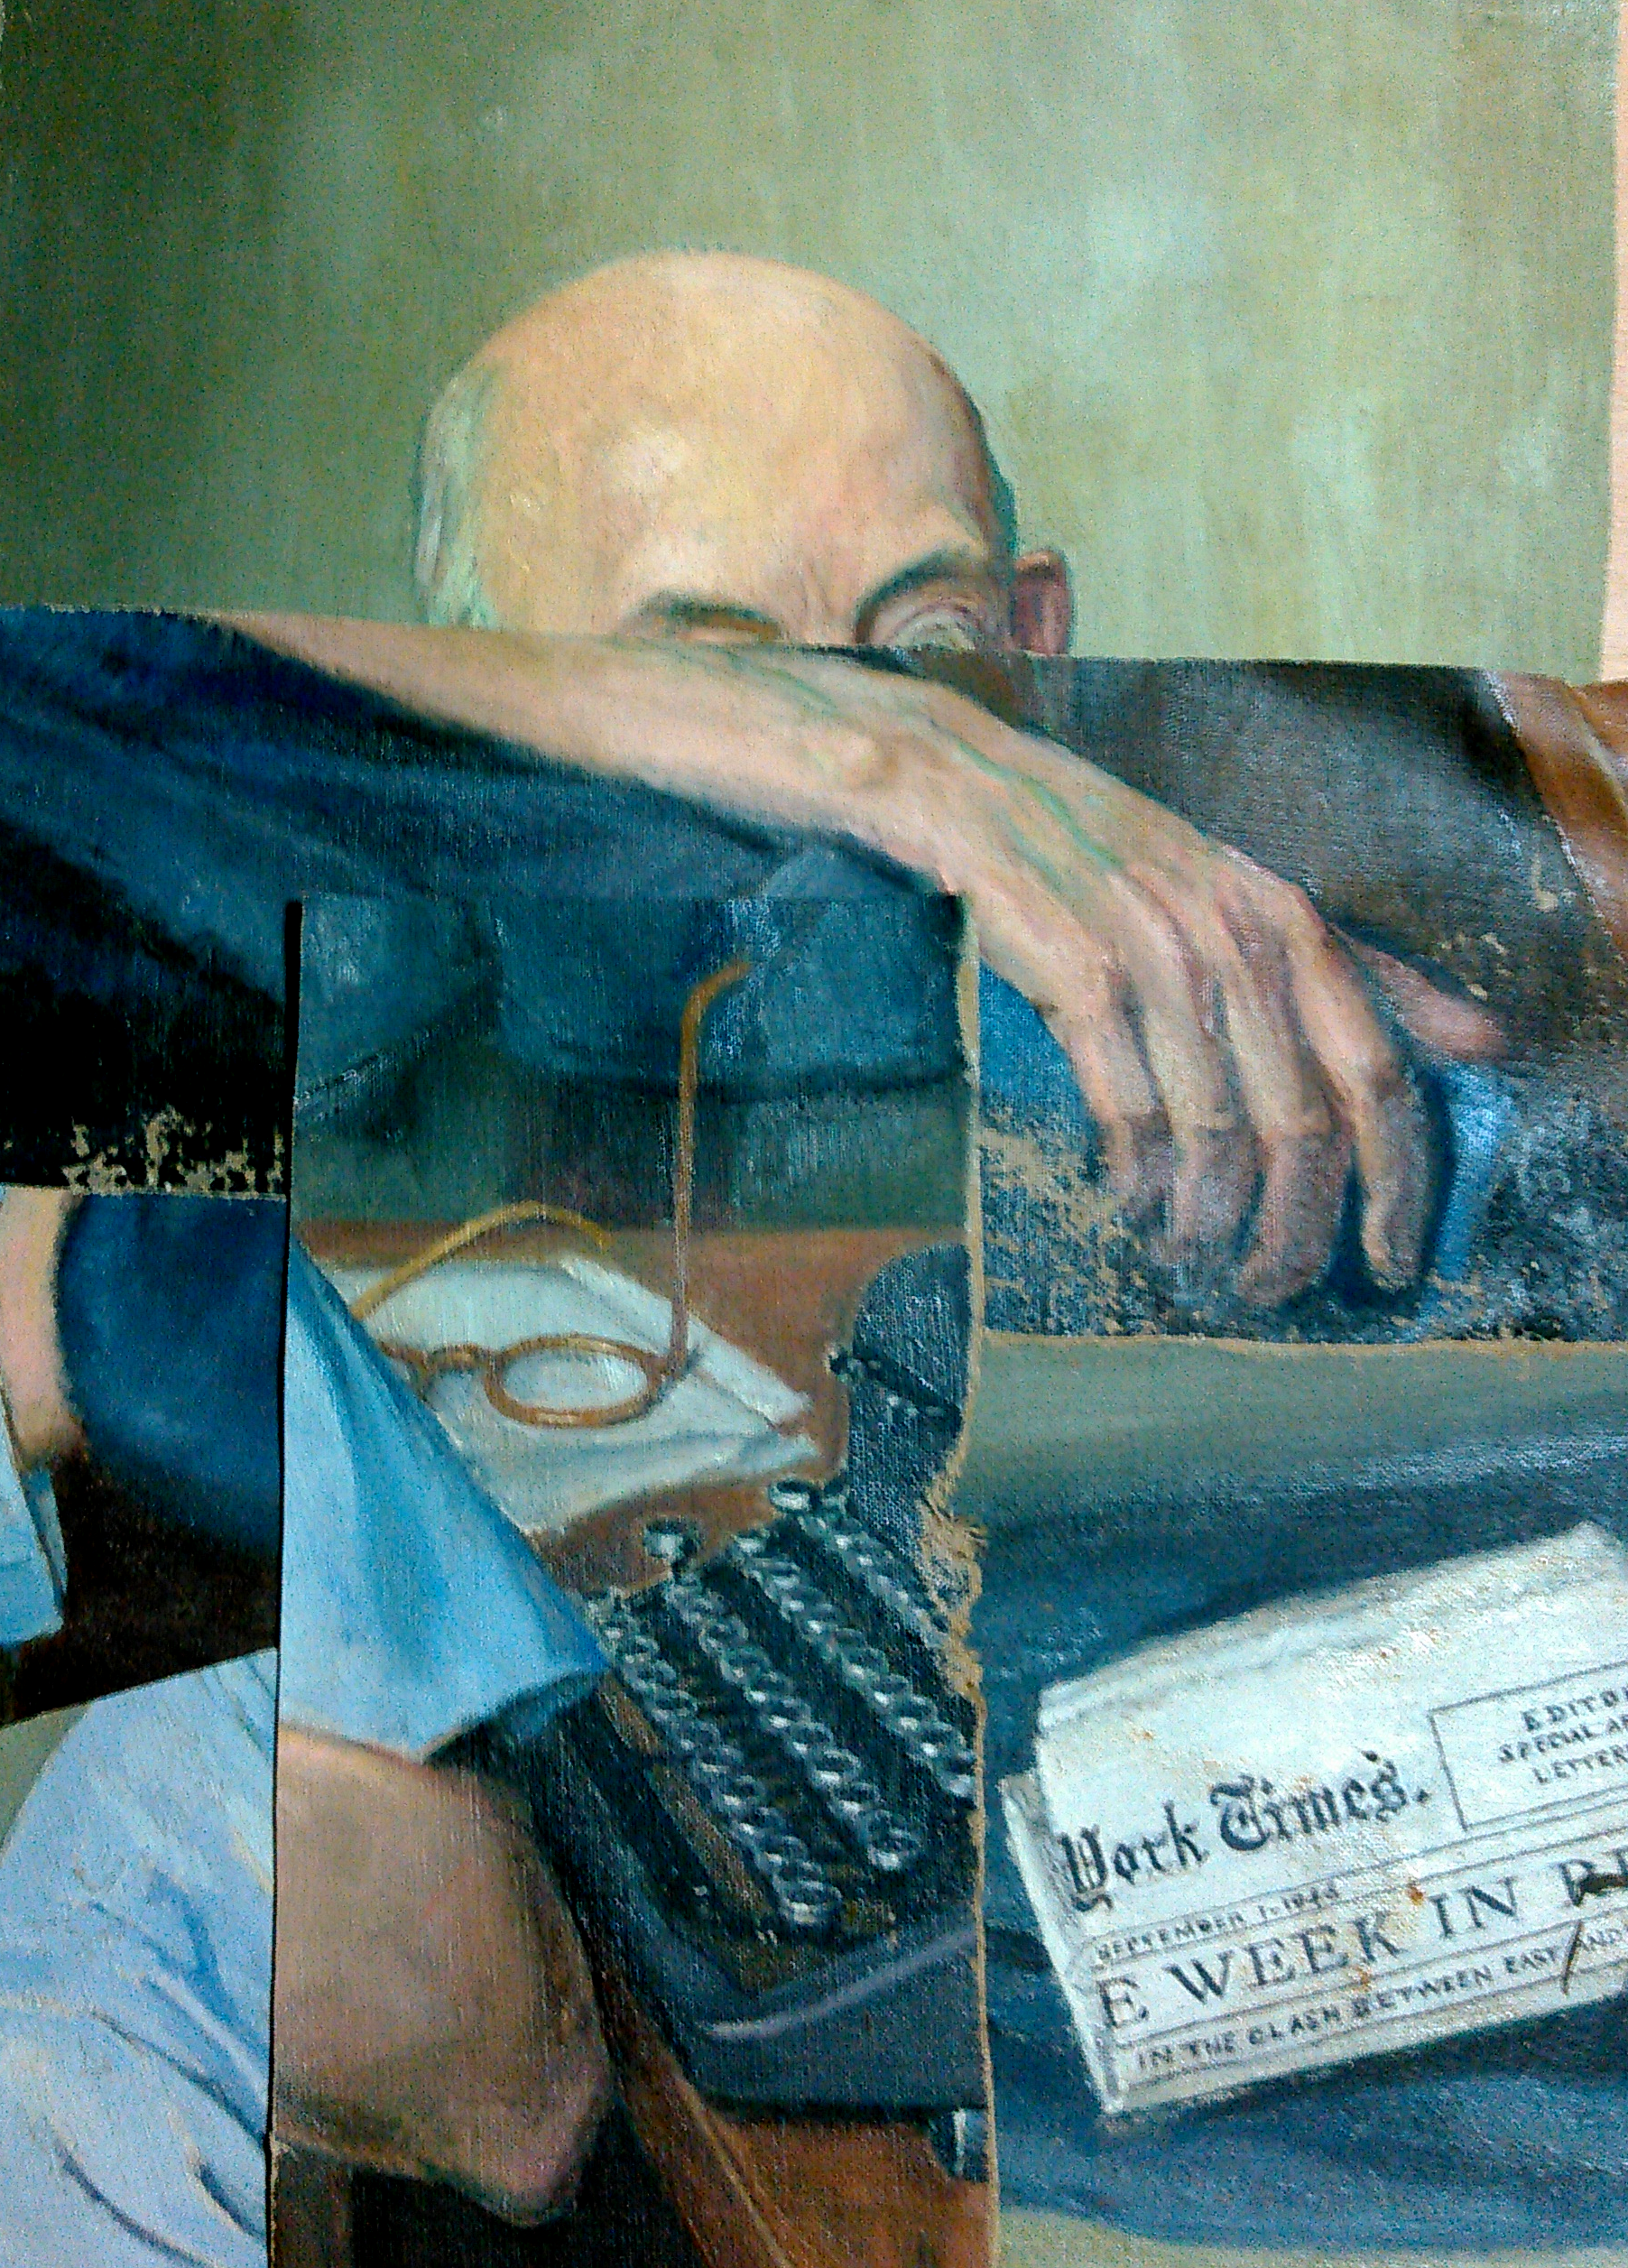 Collage of parts of an oil painting found in a New York City public trash can